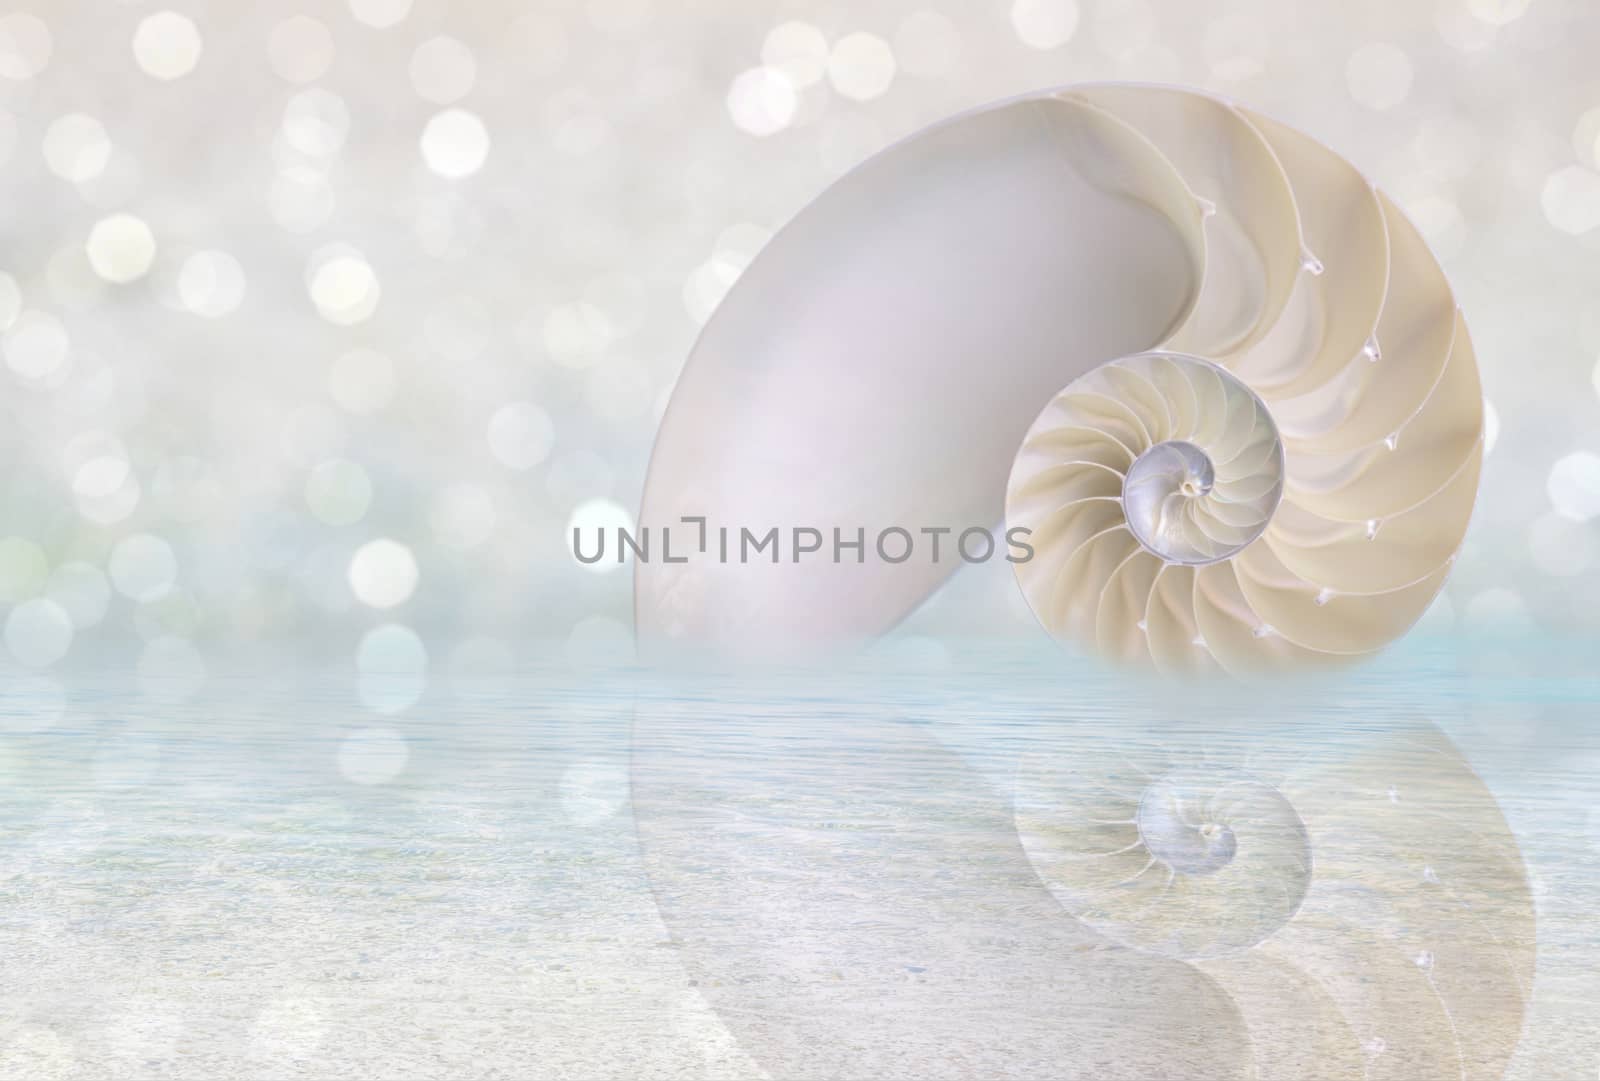 Chambered Nautilus cutaway Shell on beach reflected in water